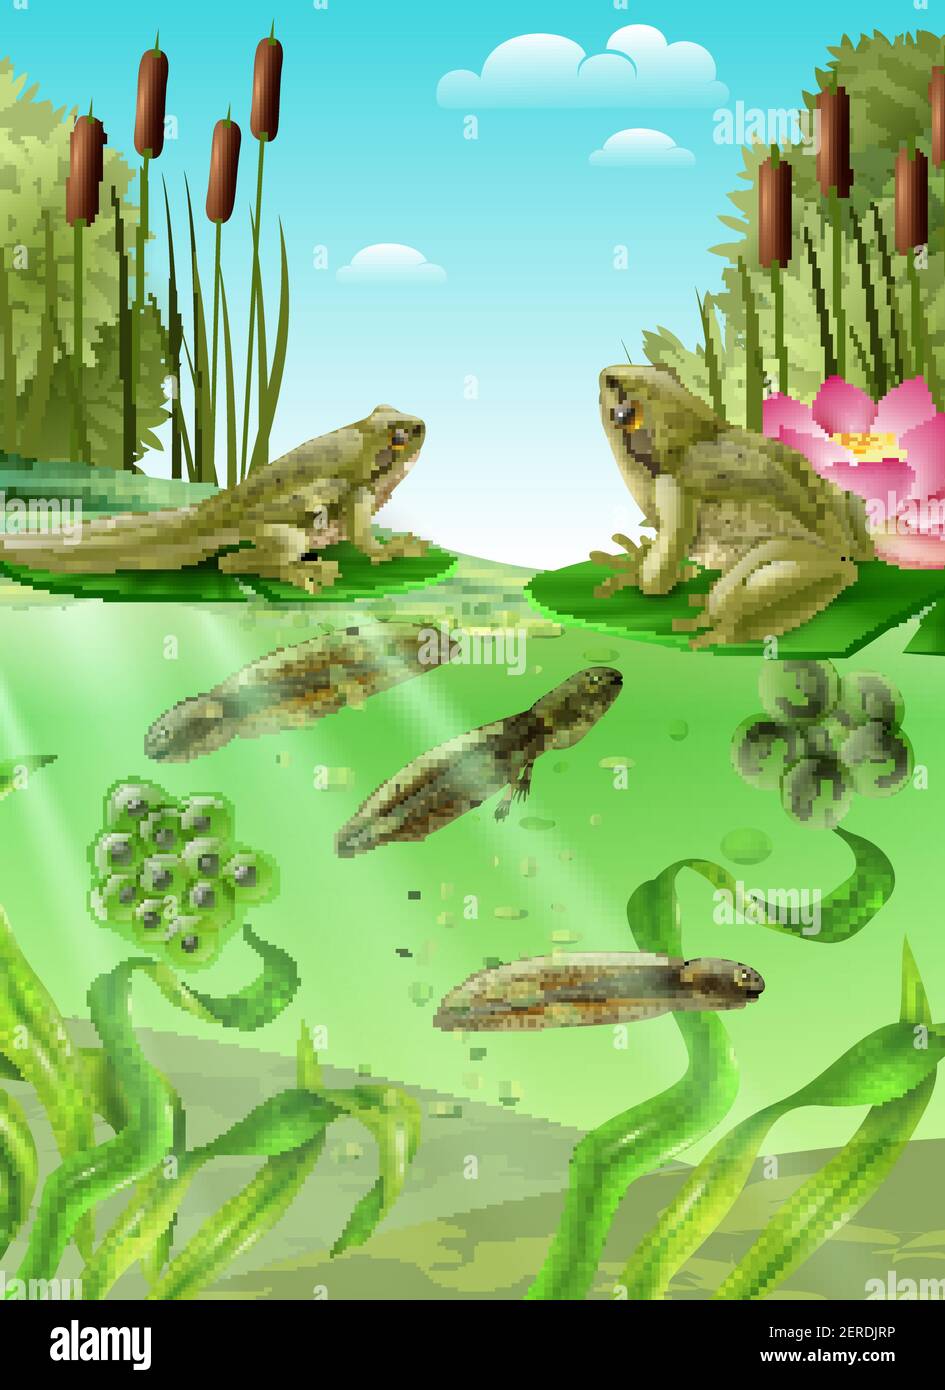 Frog life cycle water stages realistic poster with adult amphibian eggs mass tadpole with legs vector illustration Stock Vector